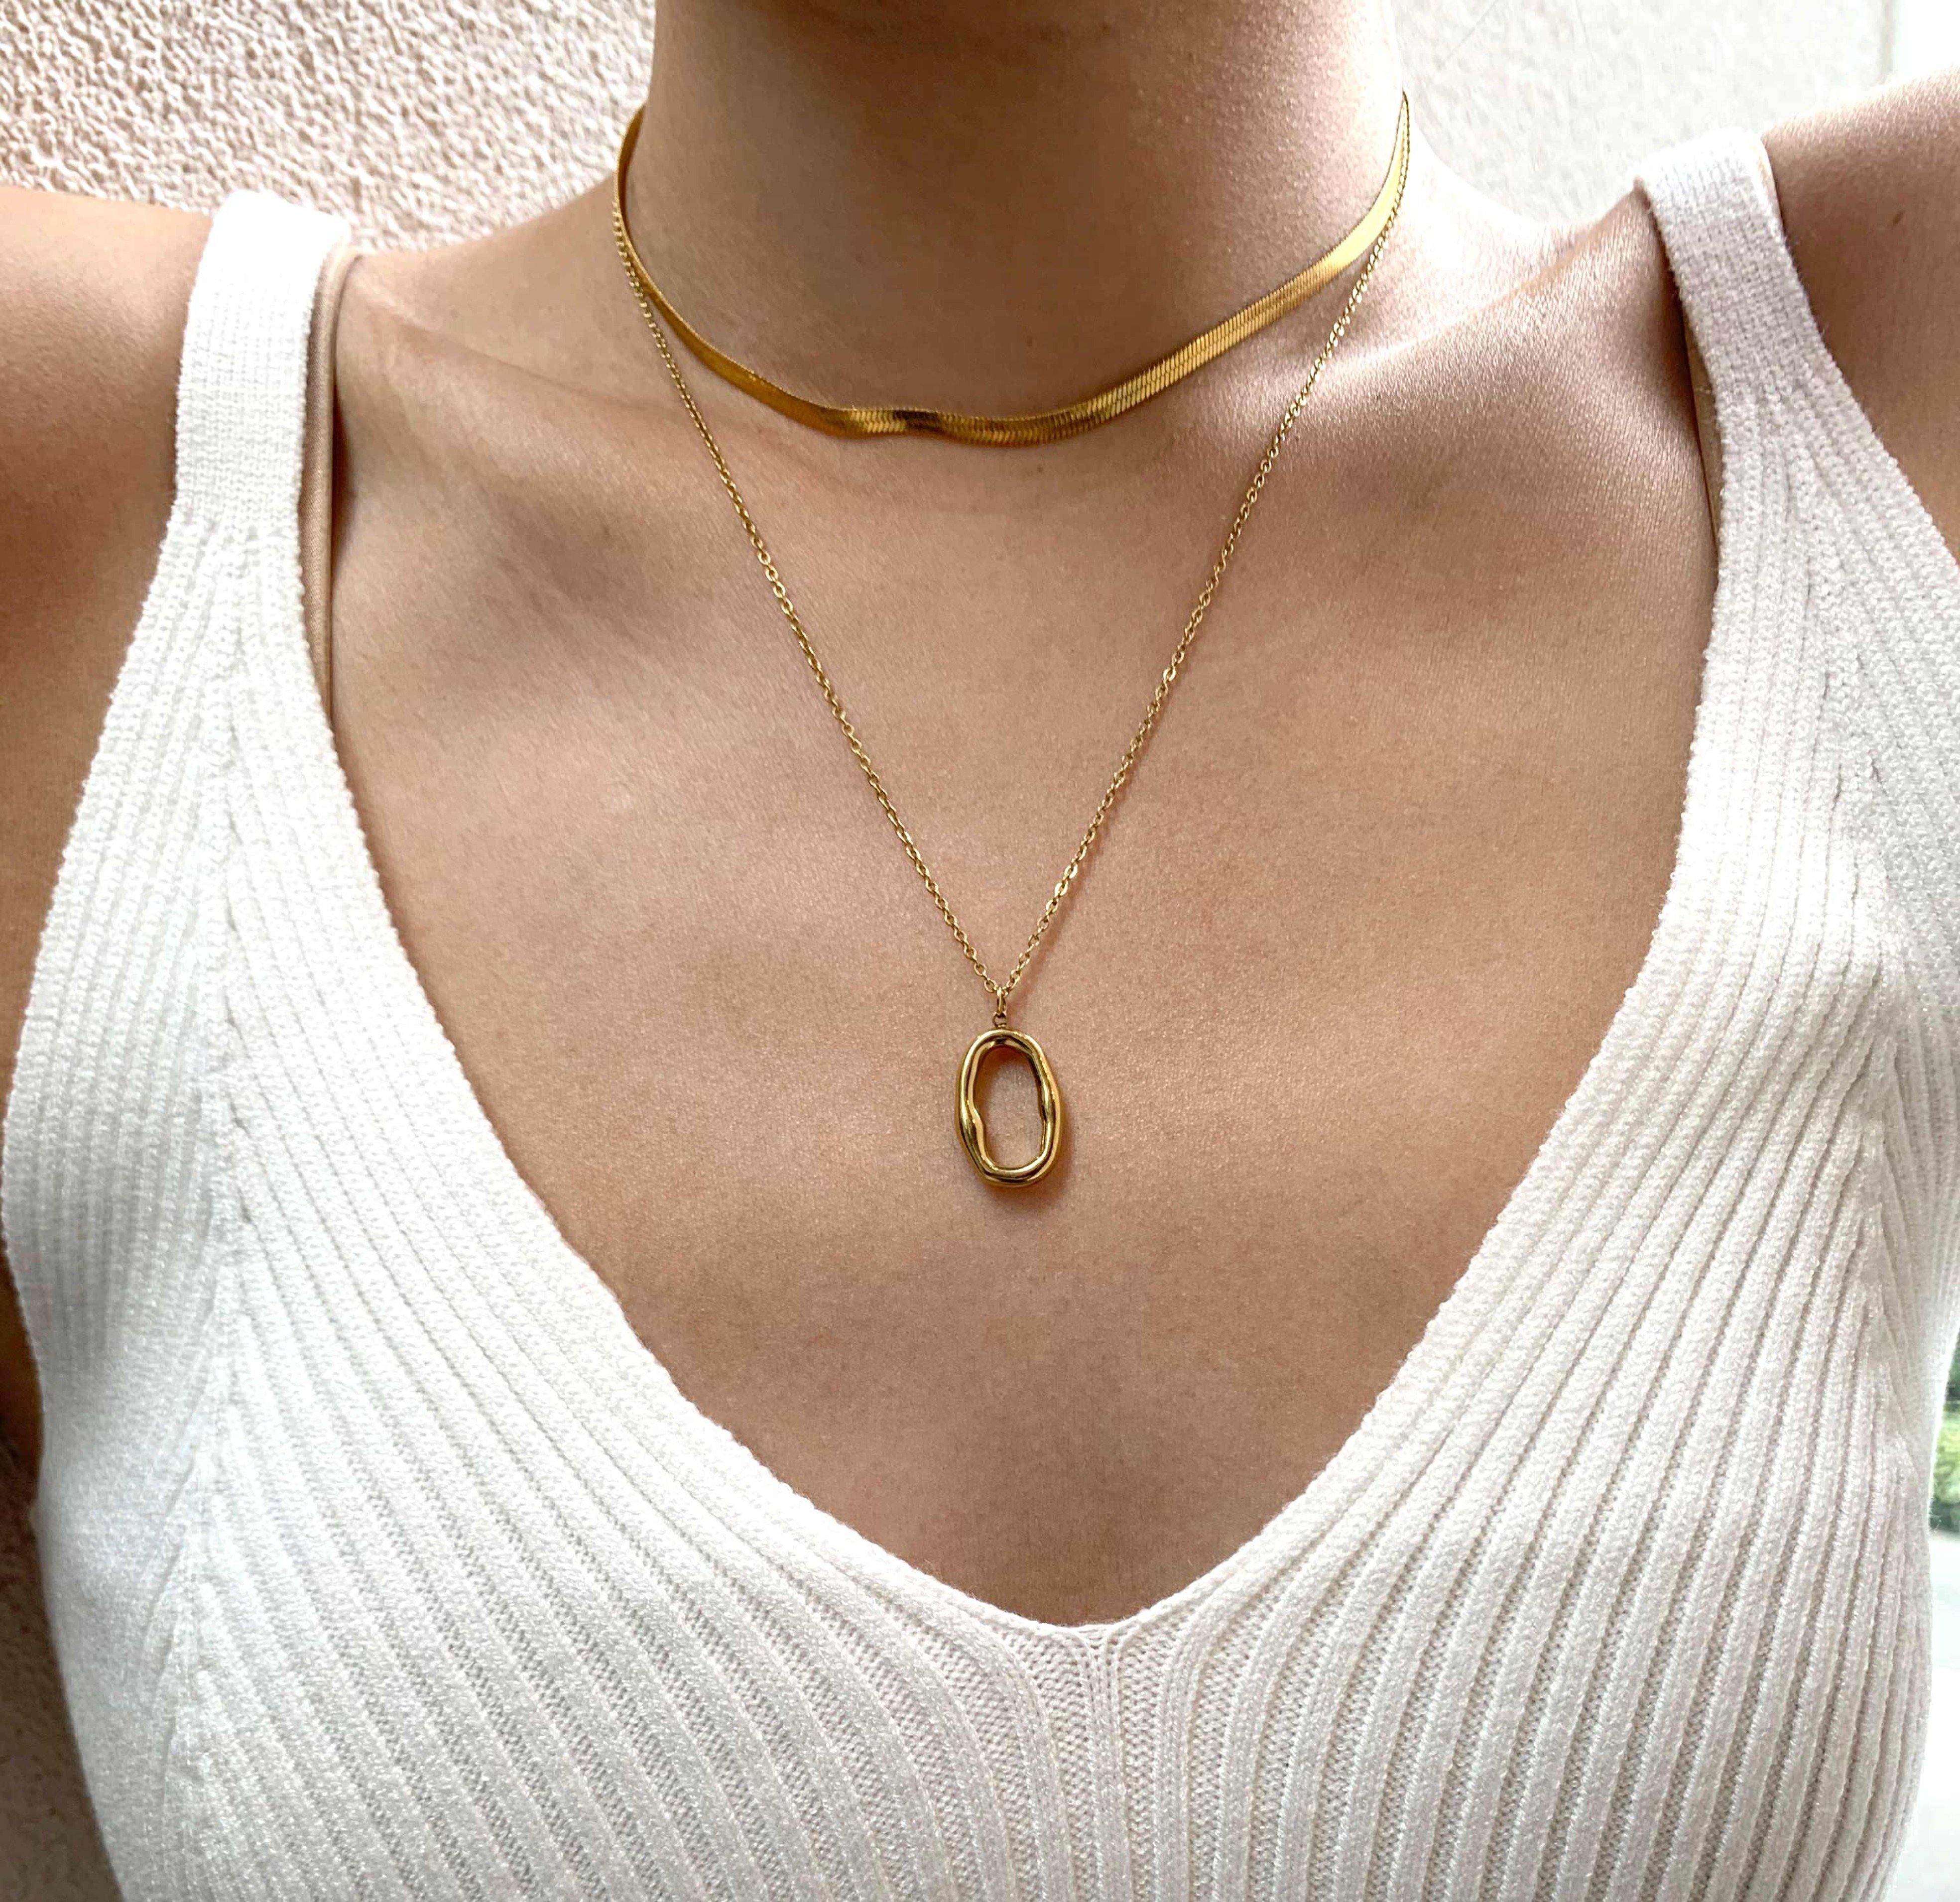 gold oval pendant necklace